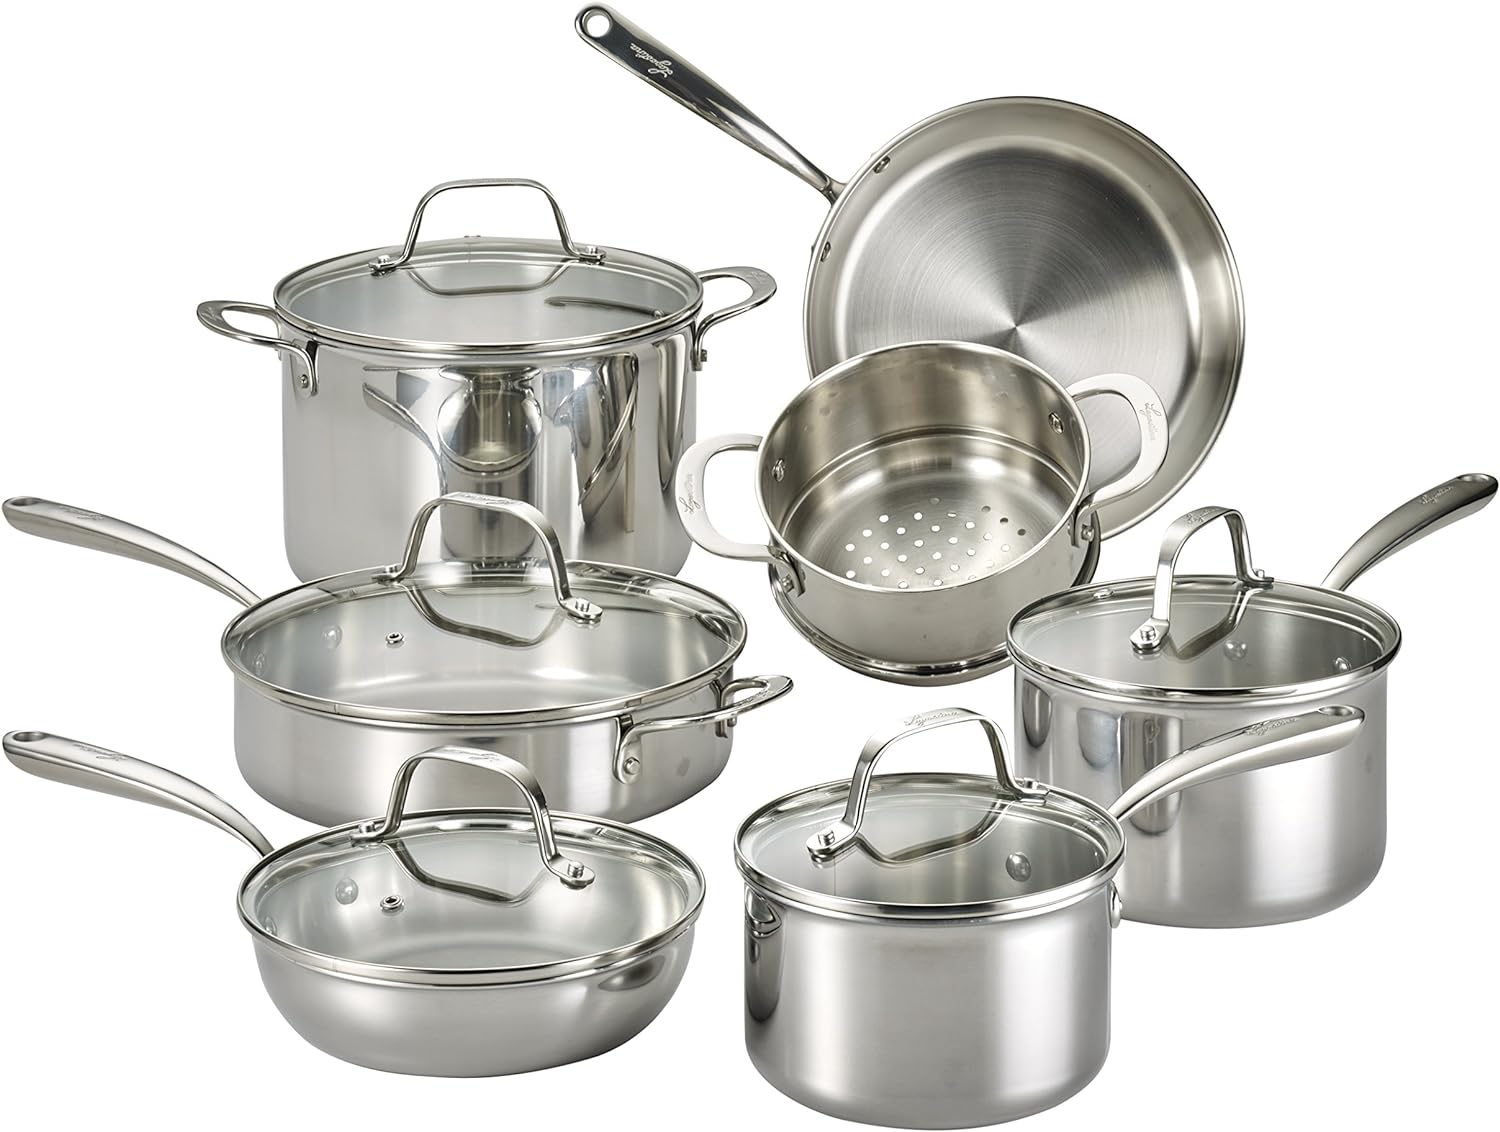 Lagostina Tri-Ply Stainless Steel Cookware Set